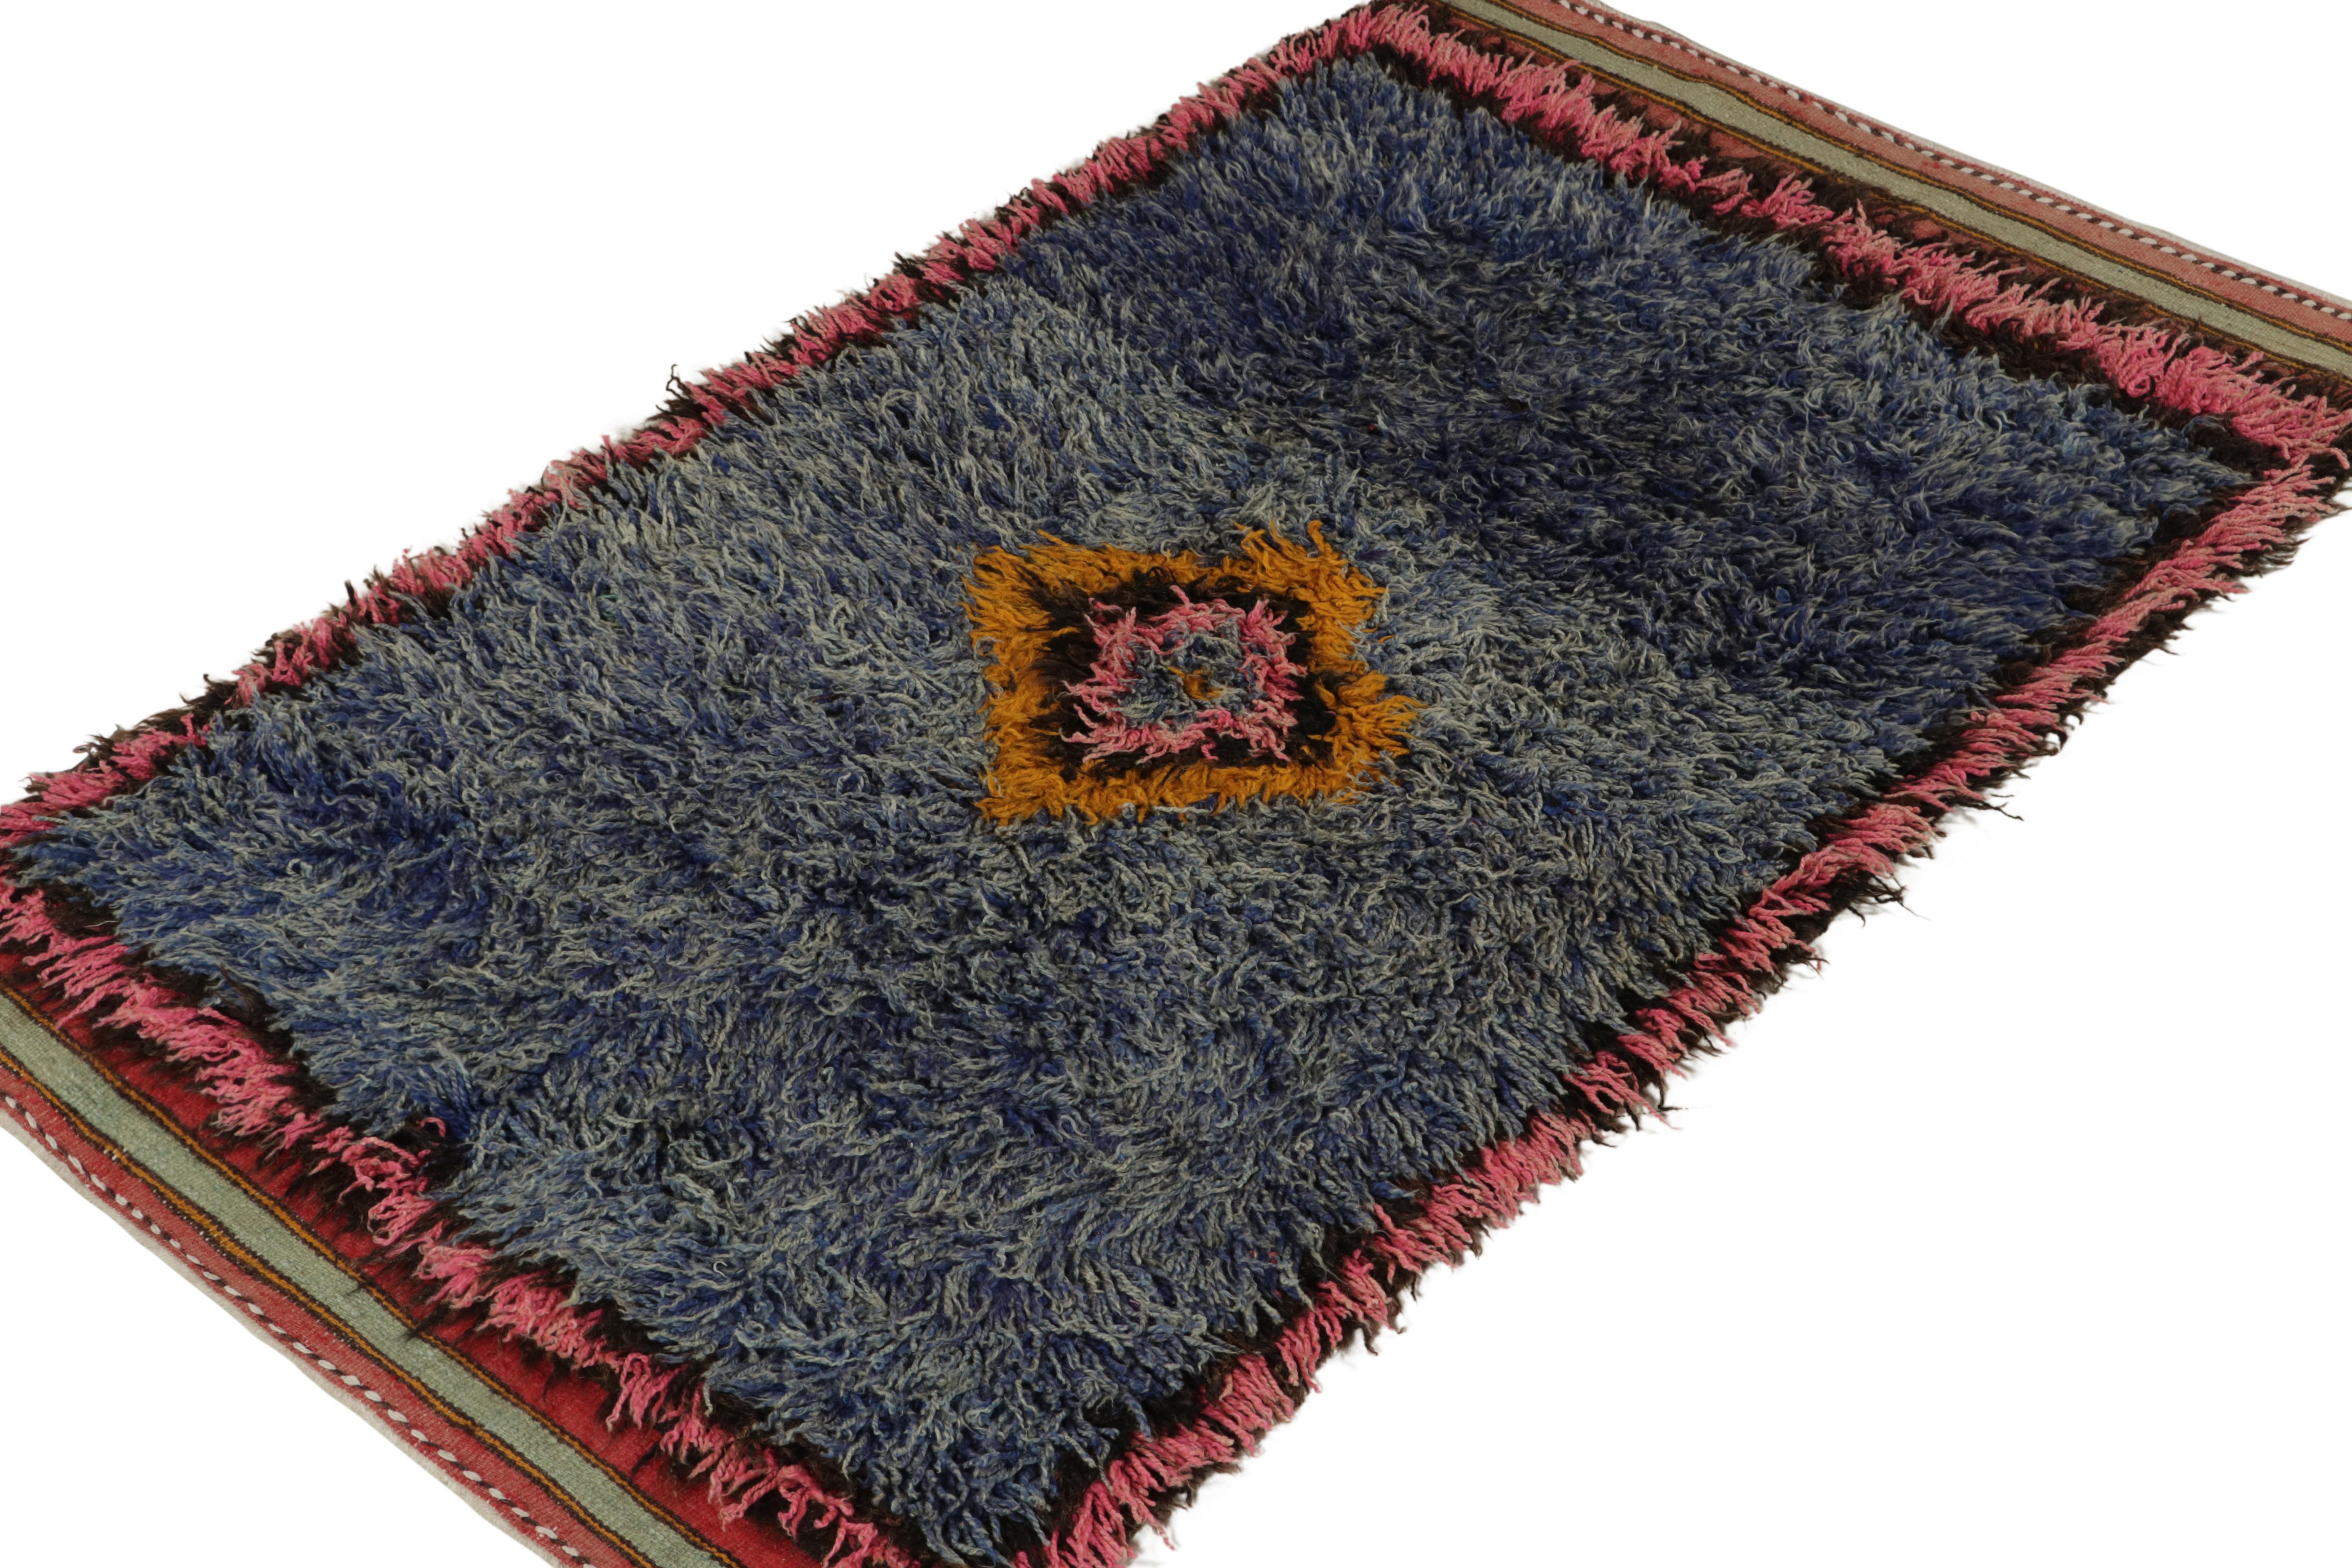 This vintage 5x6 Tulu rug is from the latest entries in Rug & Kilim’s rare tribal curations. Hand-knotted in wool from Turkey circa 1950-1960.

Further On the Design:

This tribal provenance is one of the most primitive, and collectible